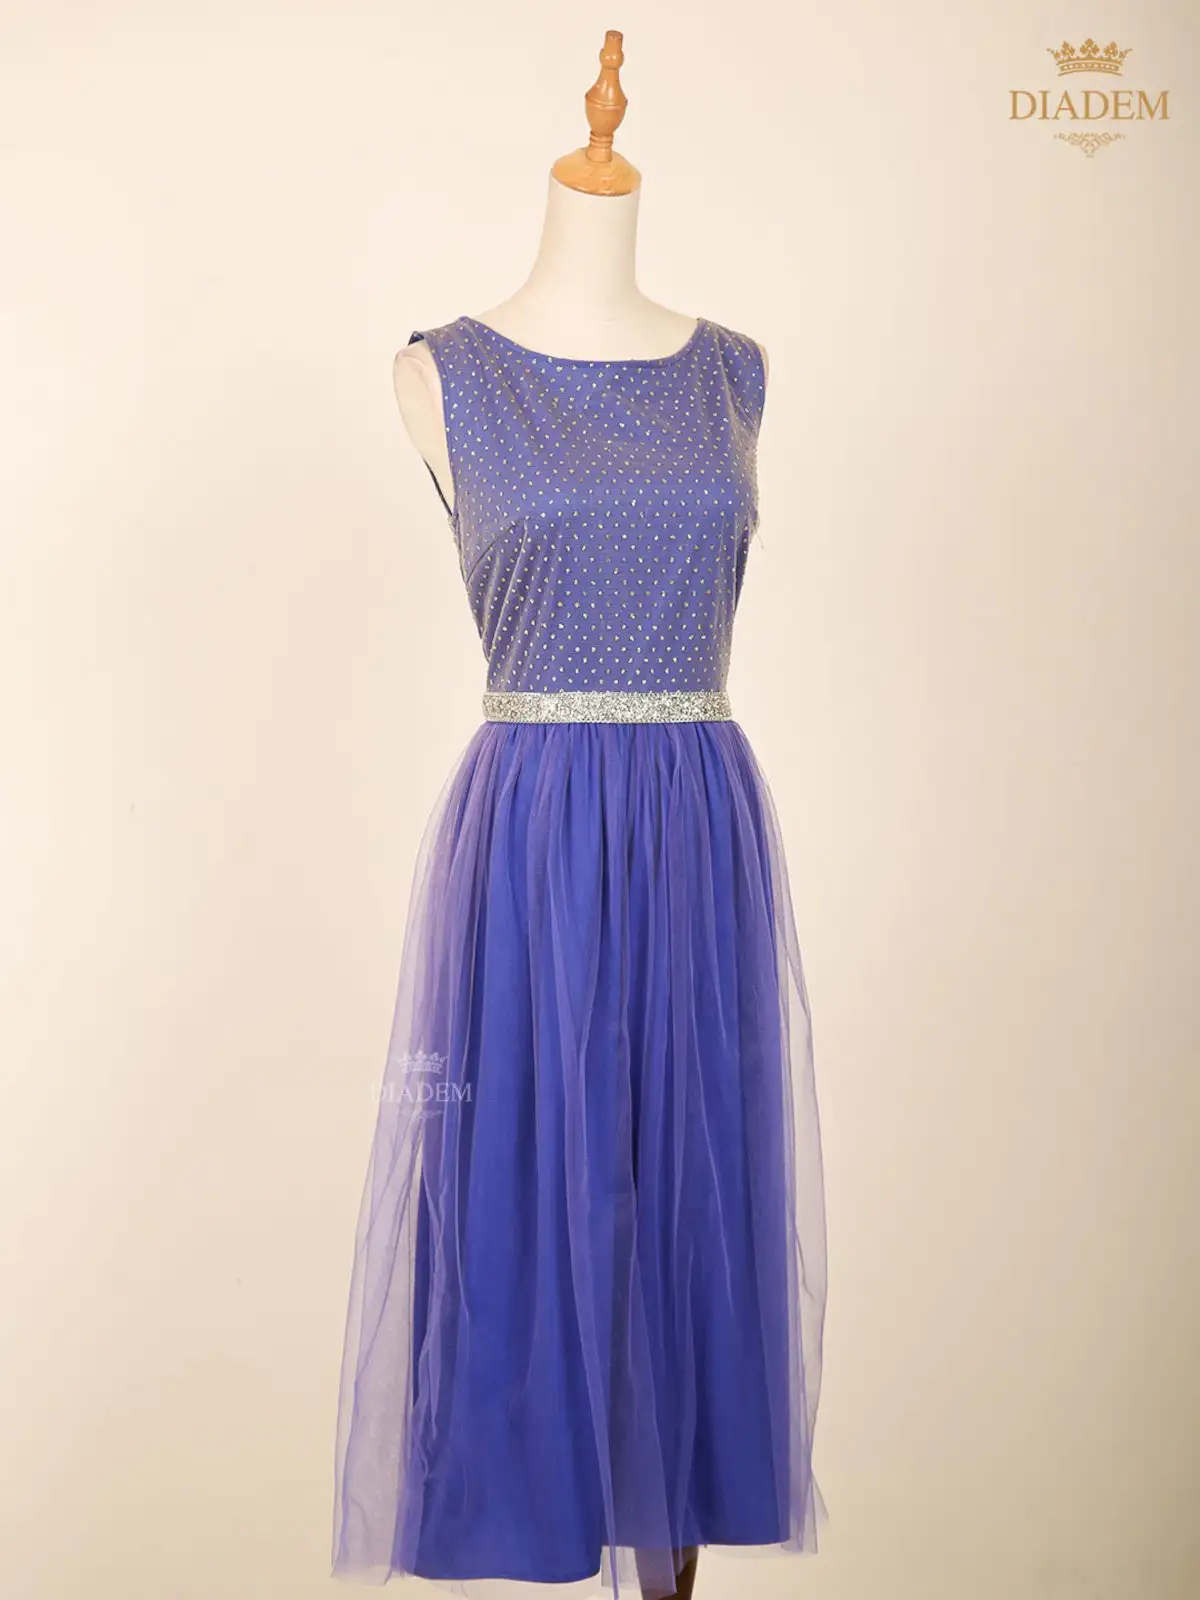 Royal Blue Netted Short Gown Adorned In Glitters